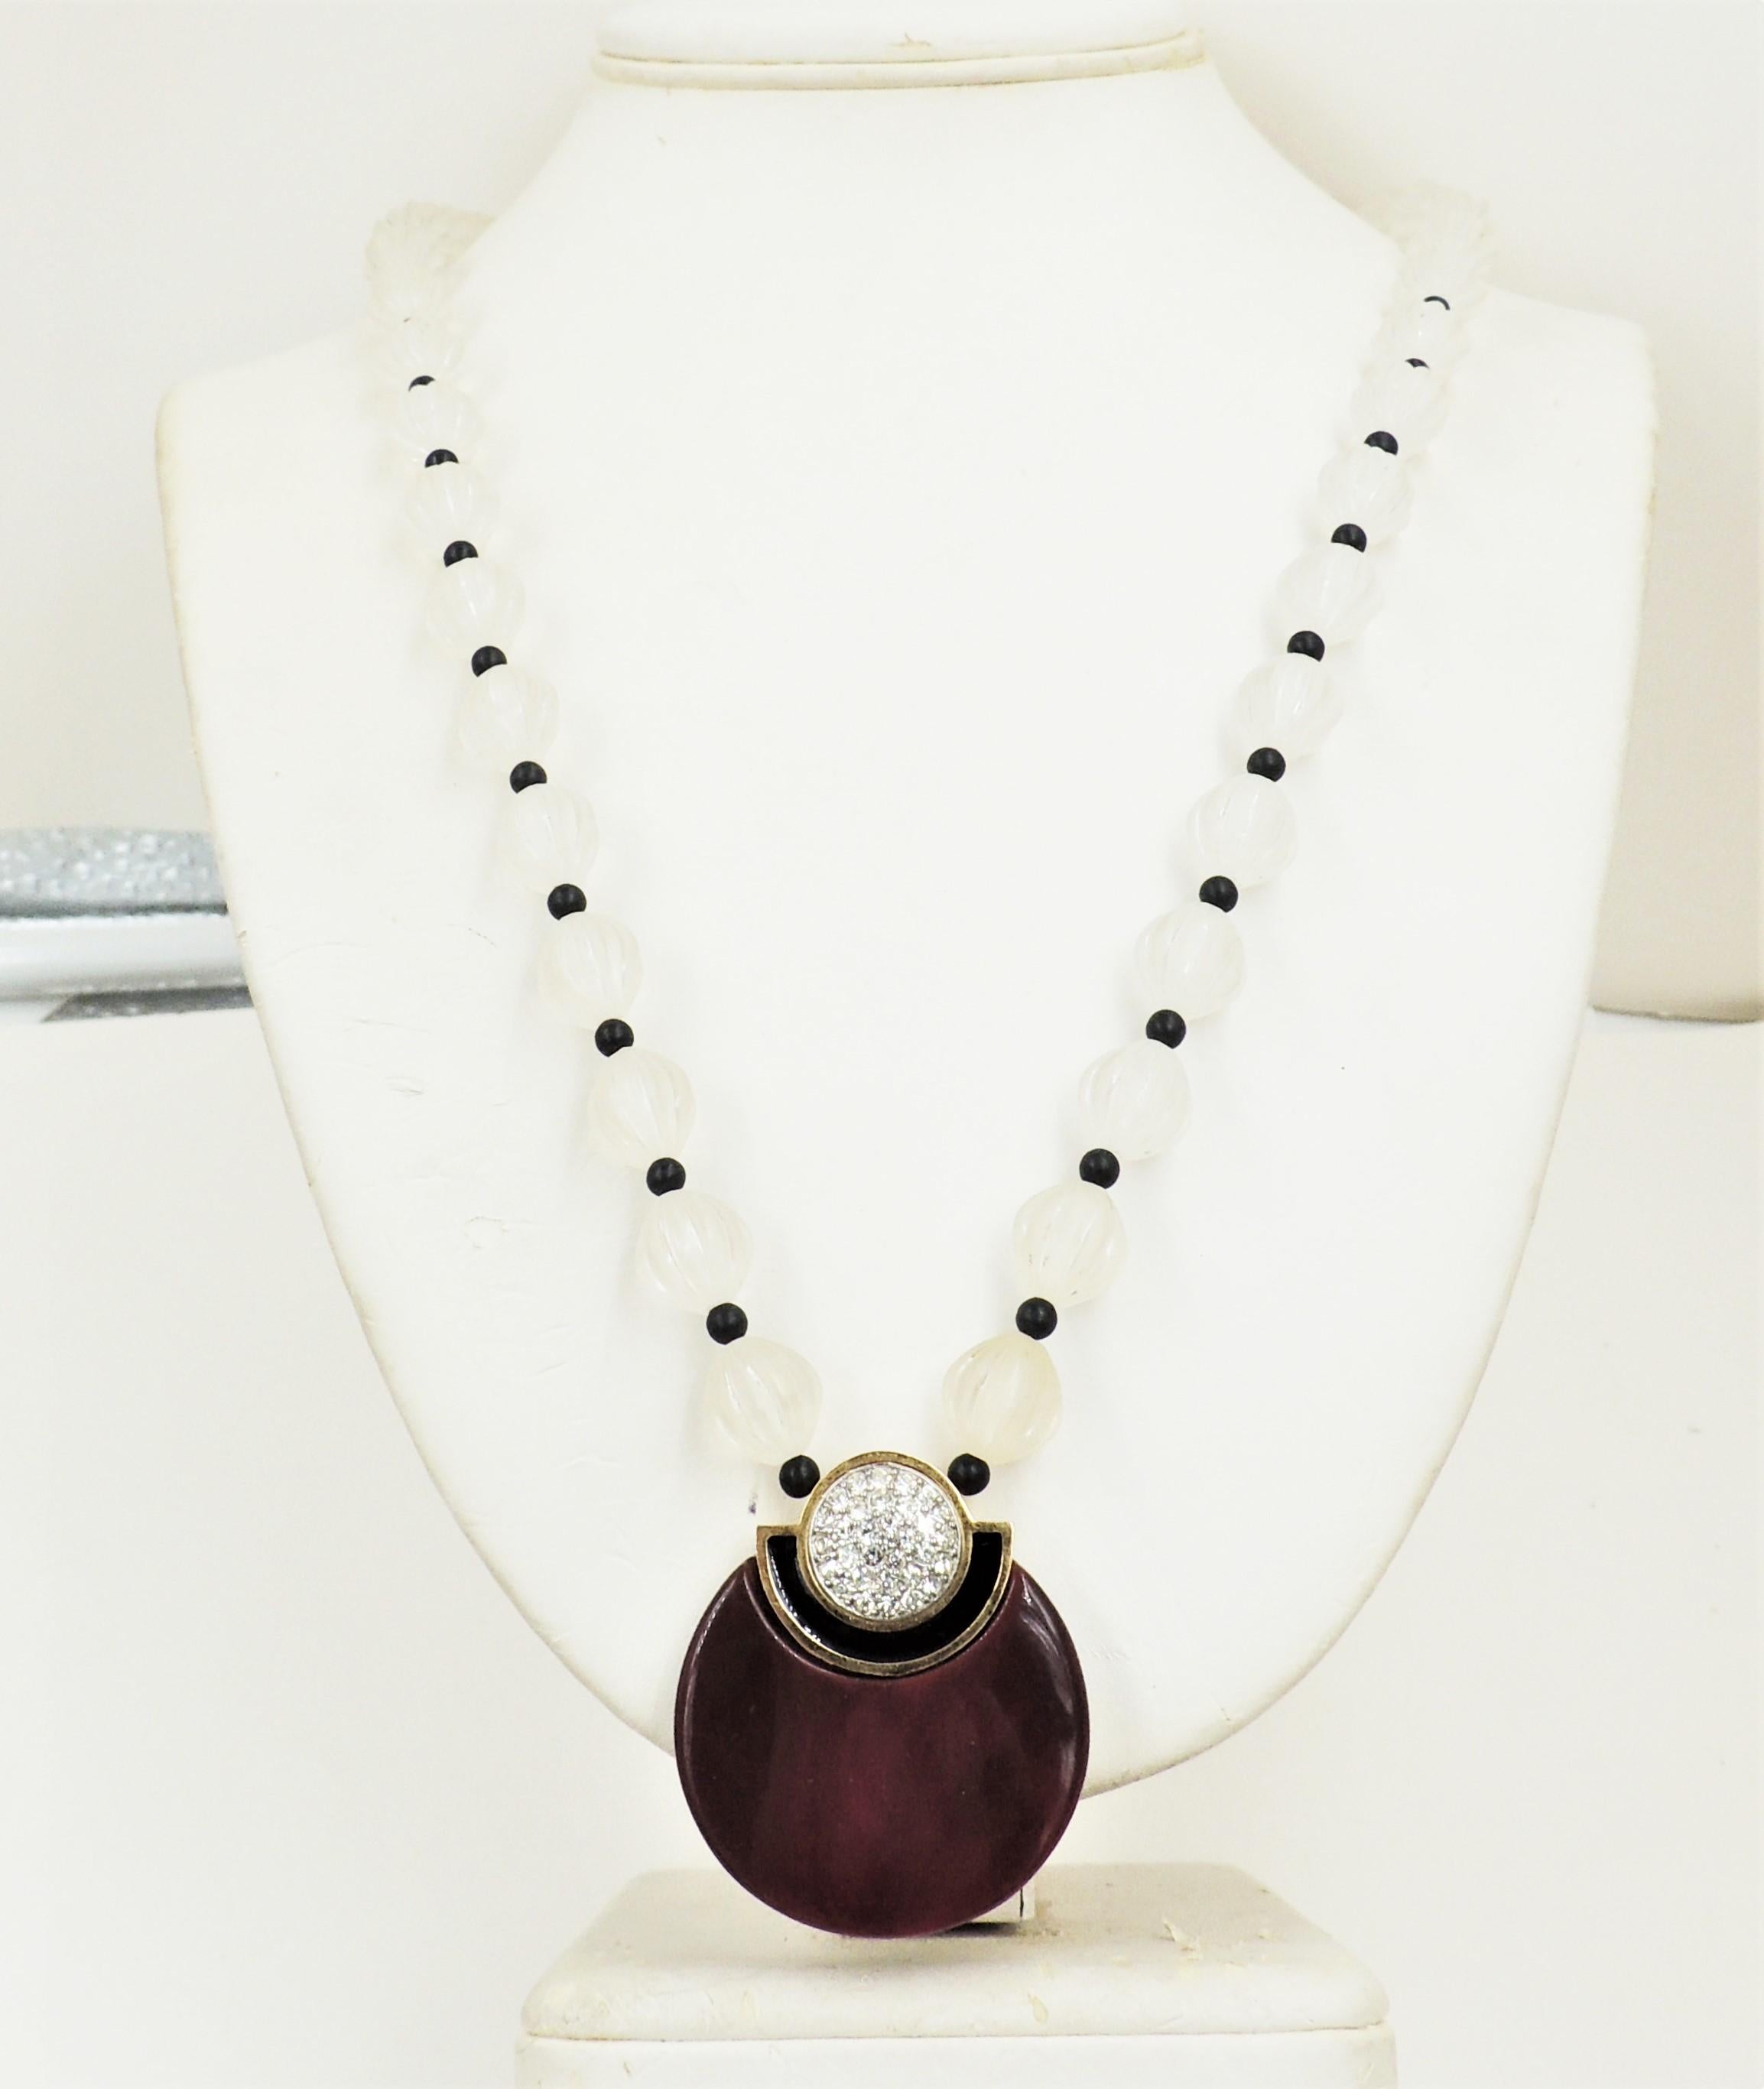 Vintage 1980s Givenchy Deco Style Lucite & Pave Rhinestone Pendant Necklace In Excellent Condition For Sale In Easton, PA